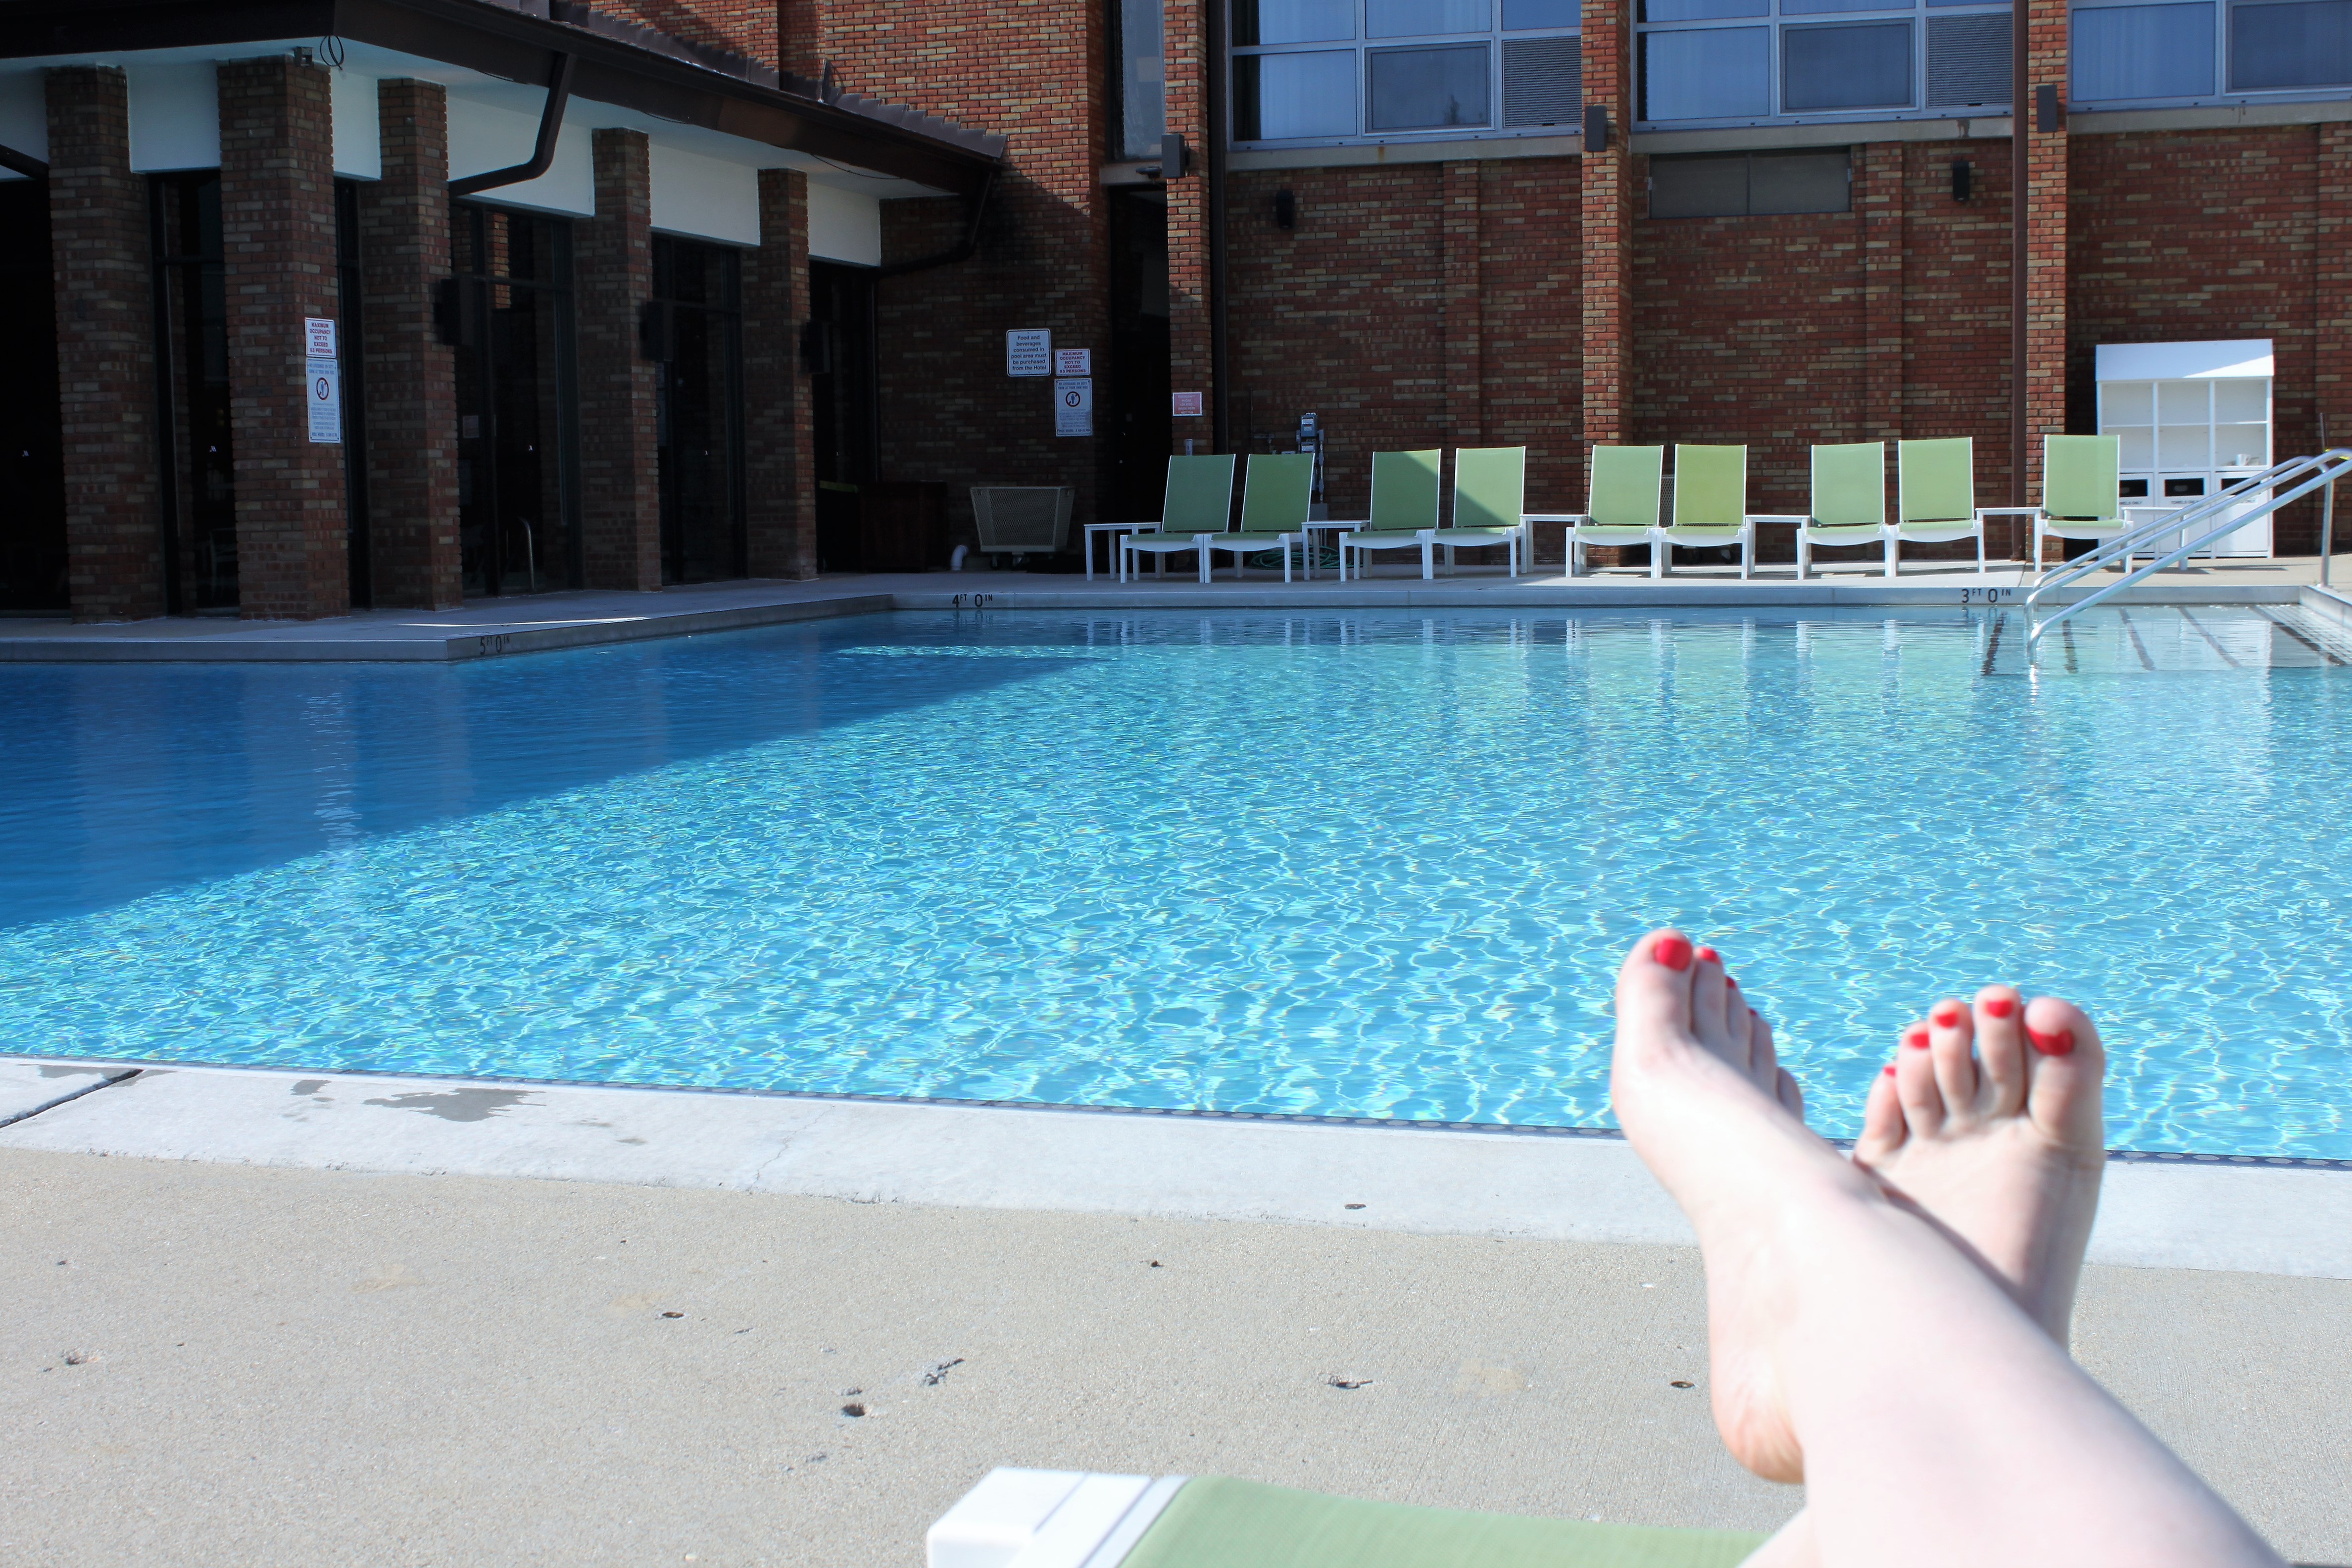 Staycation at the marriott lincolnshire resort. Perfect for a mom-cation.